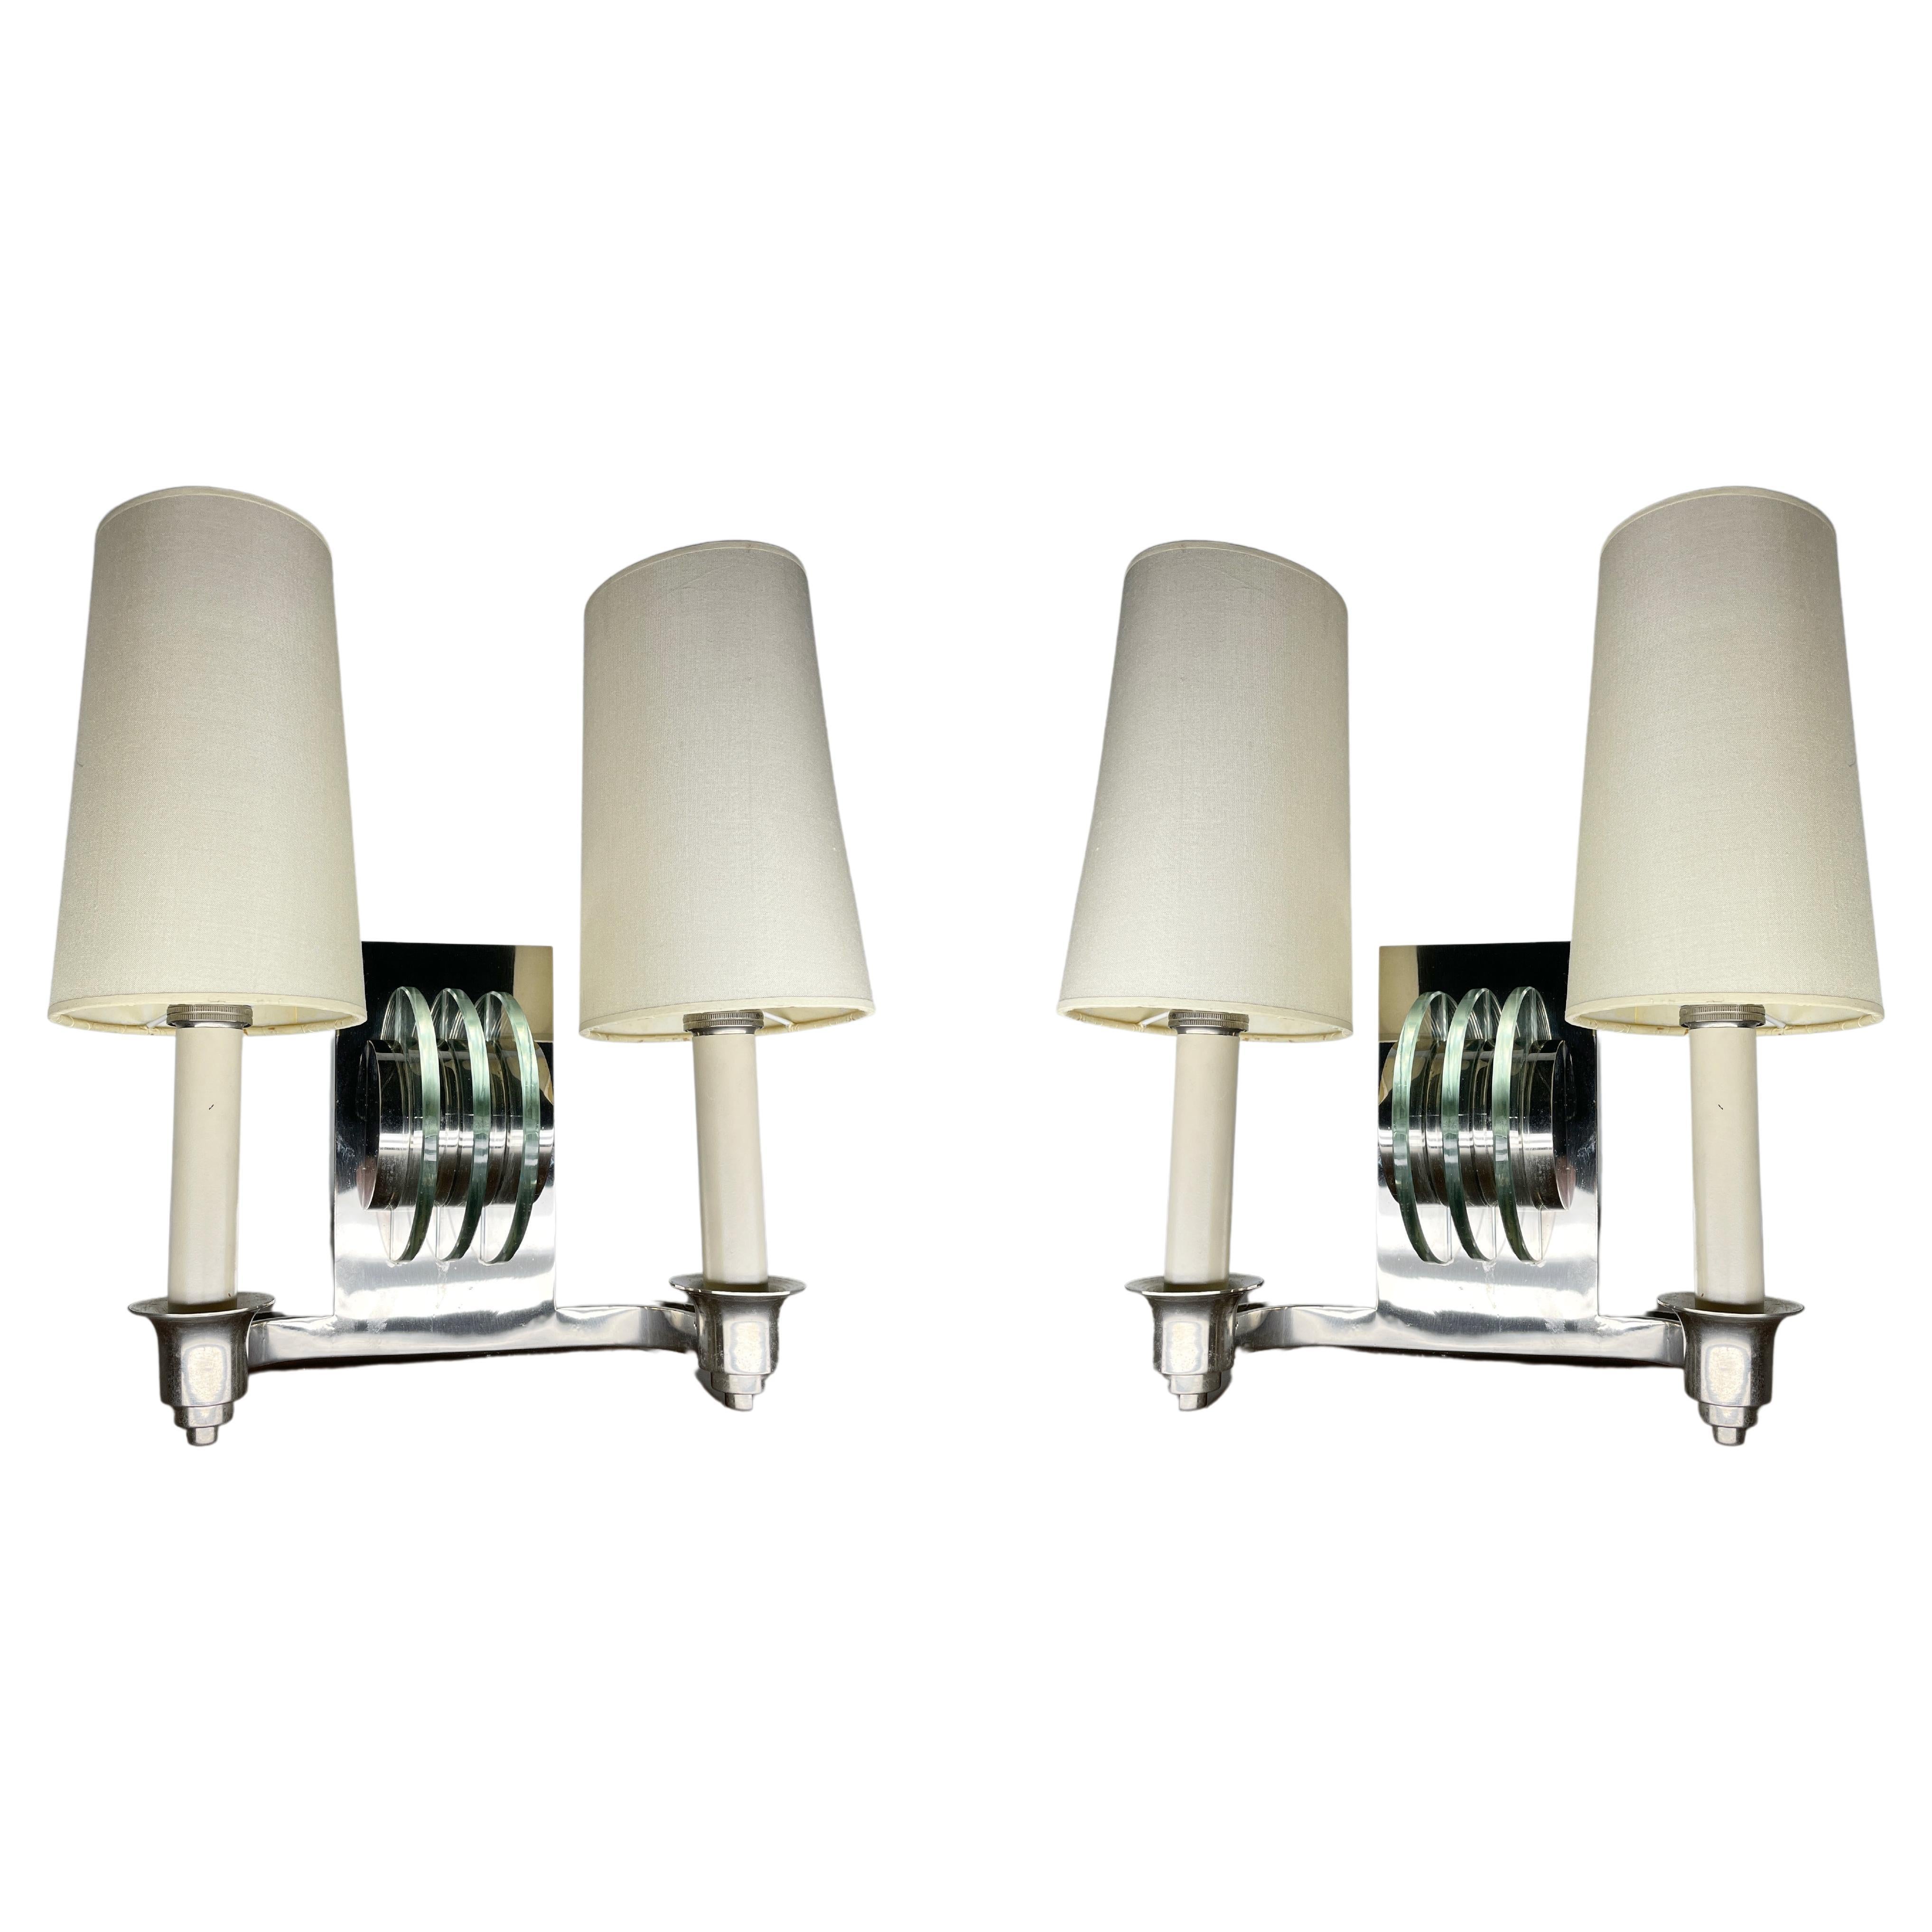 Pair of French Polished Nickel and Glass Sconces